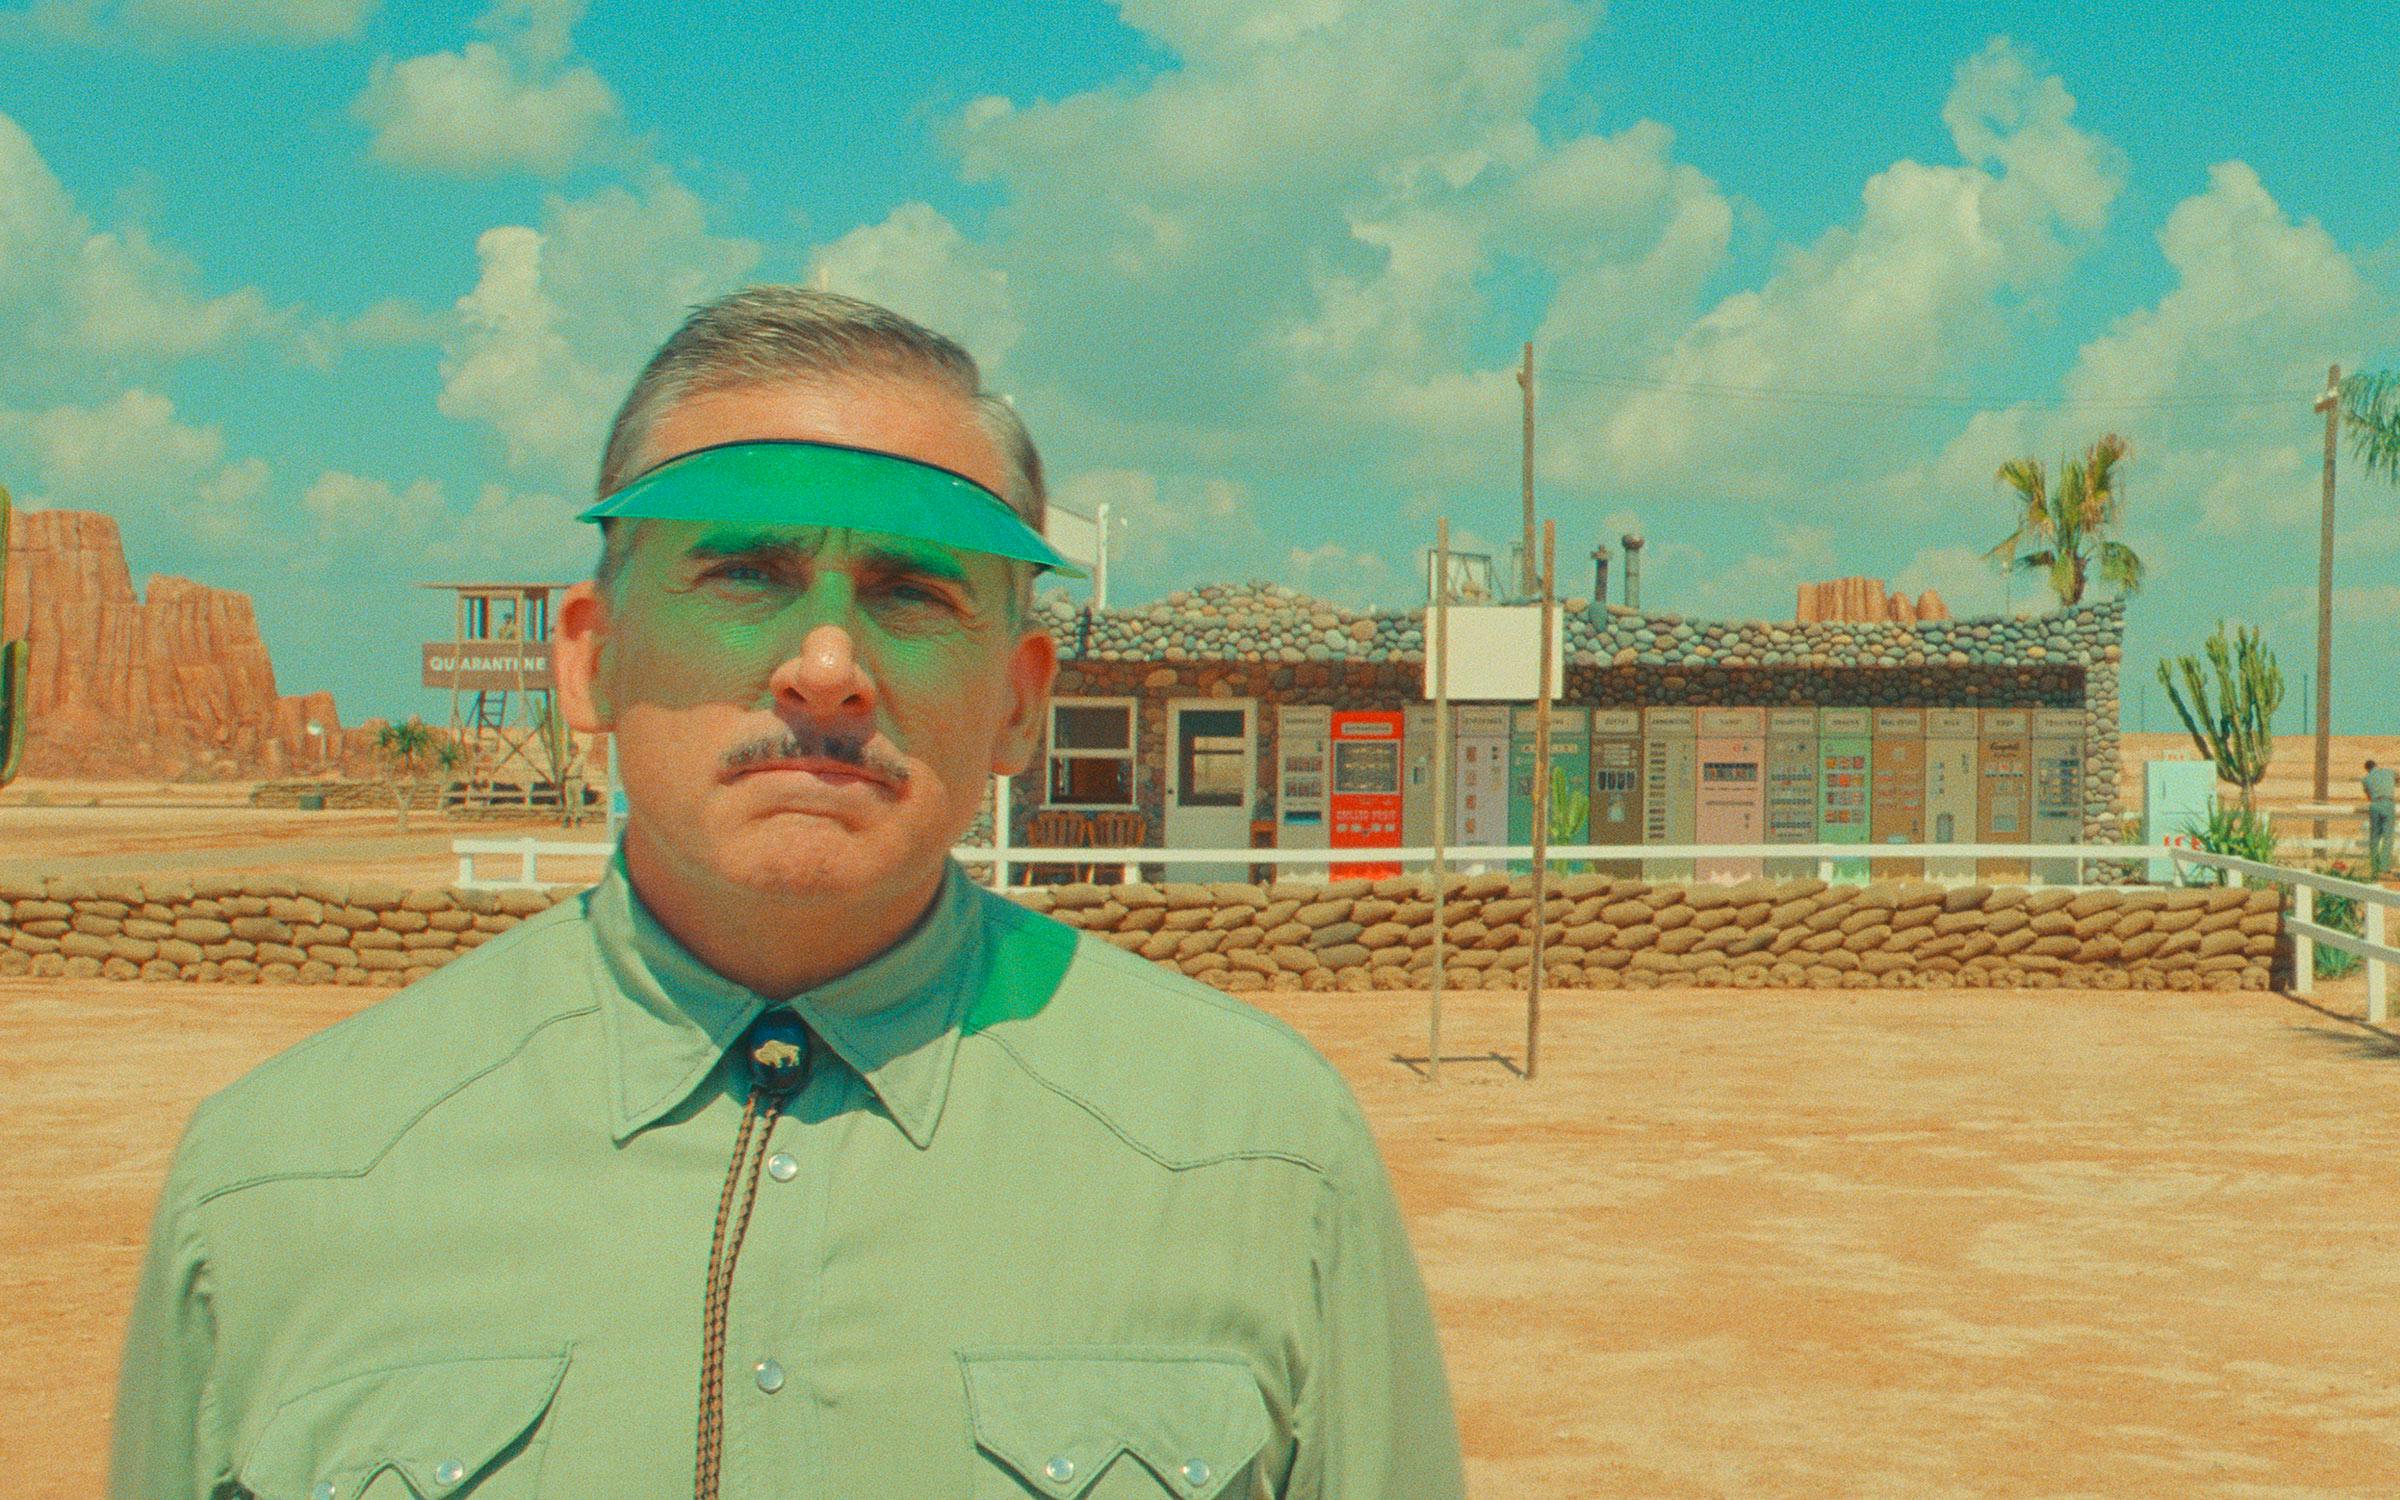 Please don't act like you're in a Wes Anderson film during your